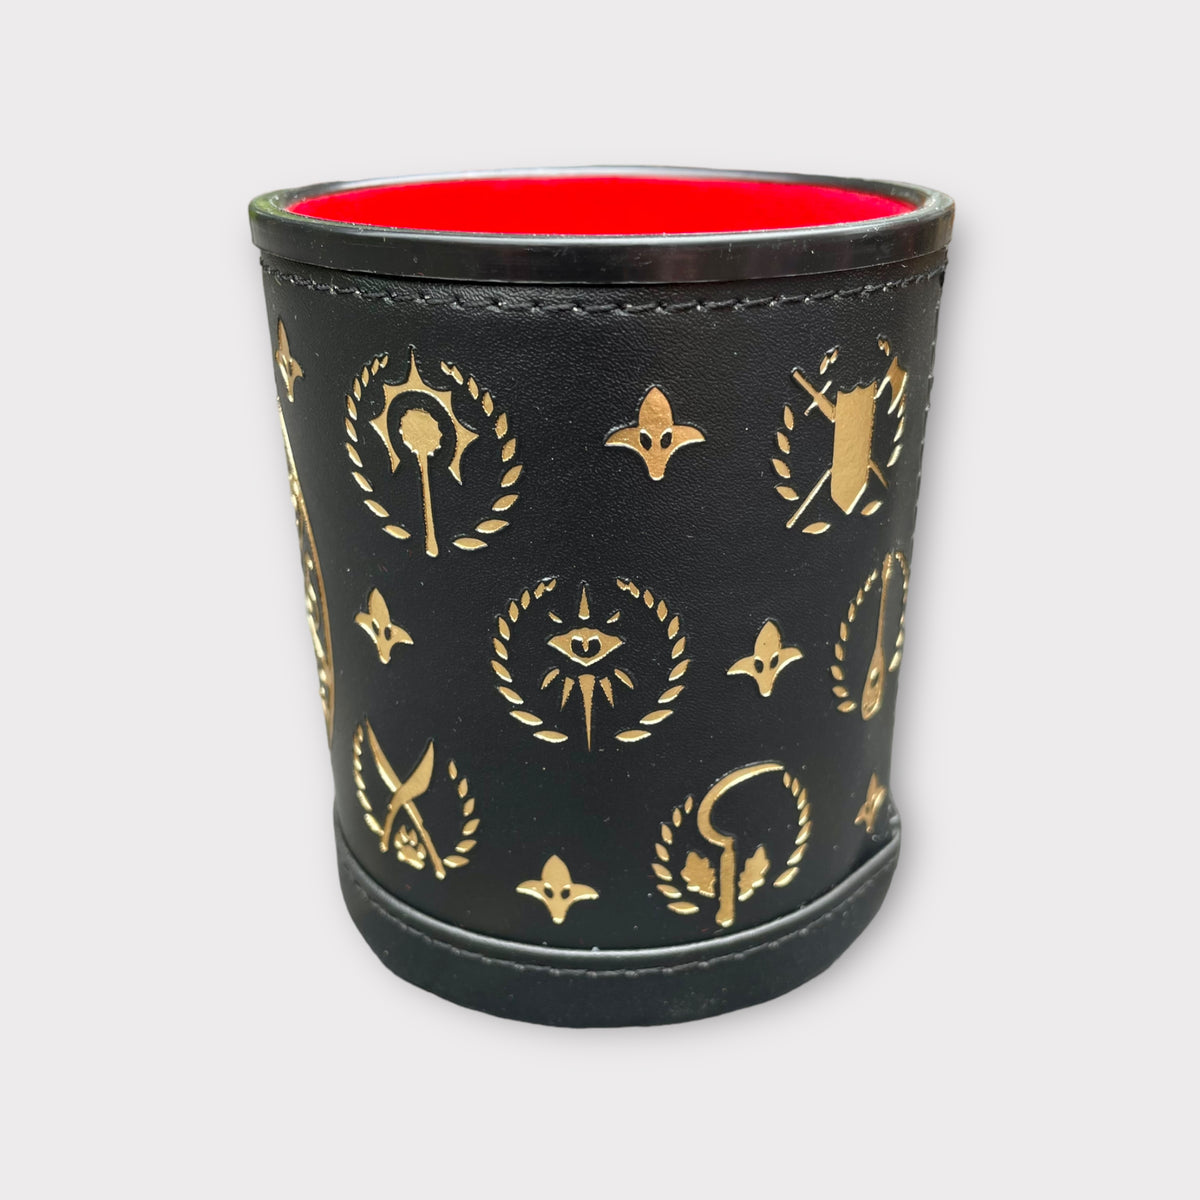 Luxury Leather Dungeons and Dragons Themed Dice Shaker Tumbler With Gold Foil Design